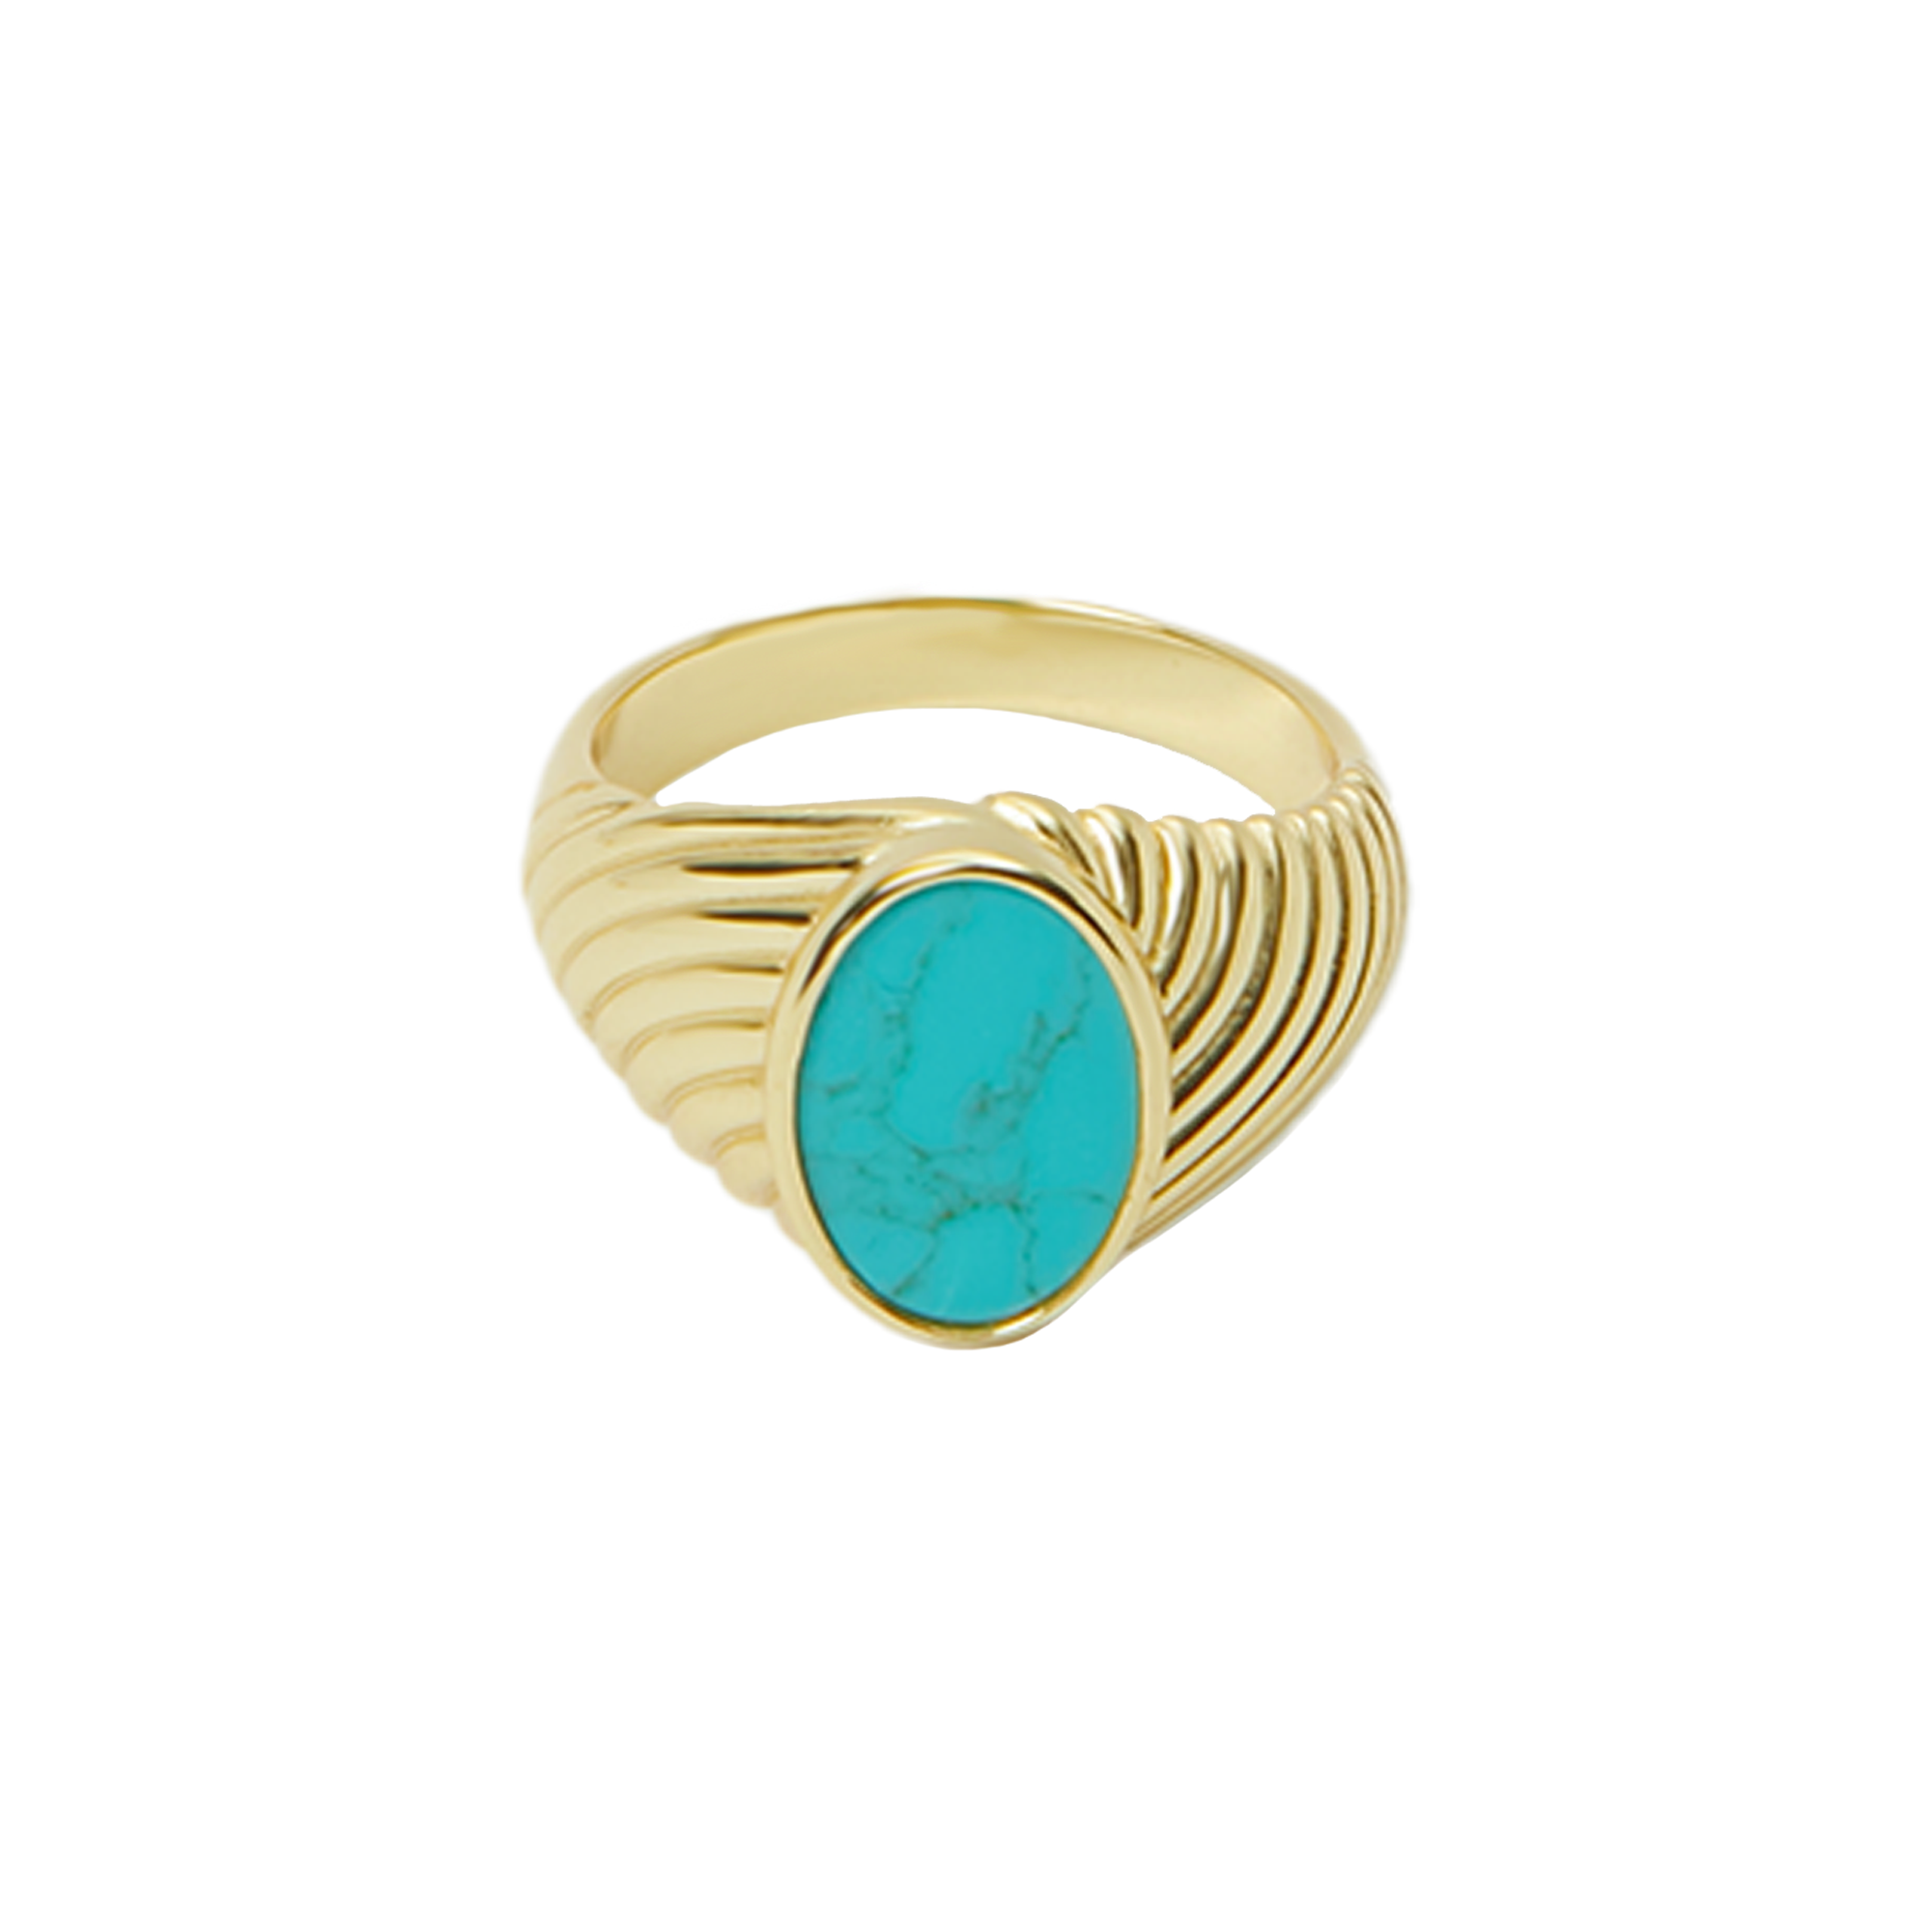 THE SIGNET RING